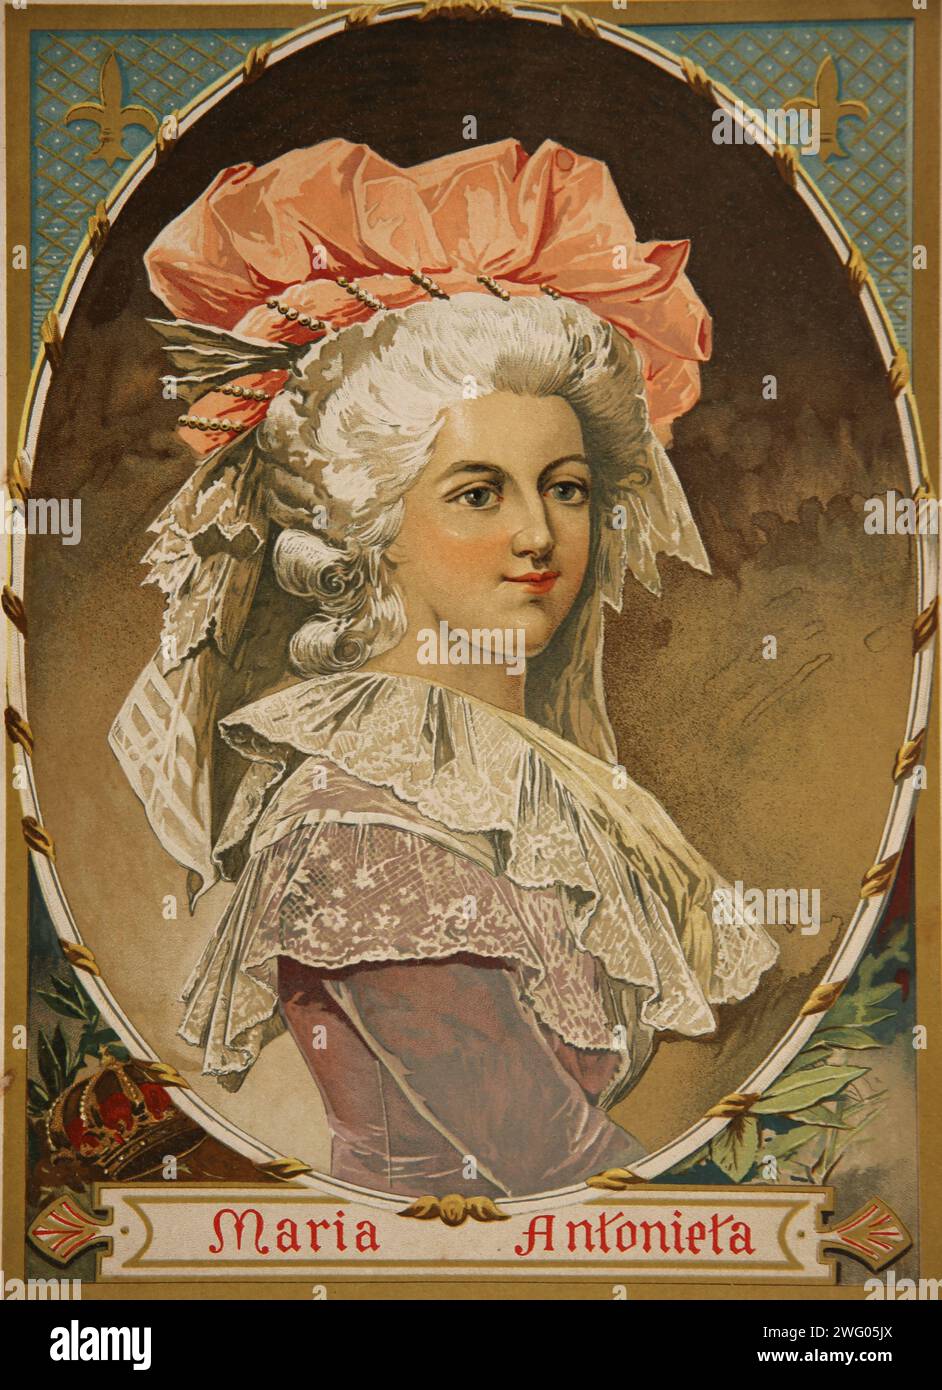 Marie Antoinette (1755-1793). Queen consort of France, wife of Louis XVI of France. Lithography. Stock Photo